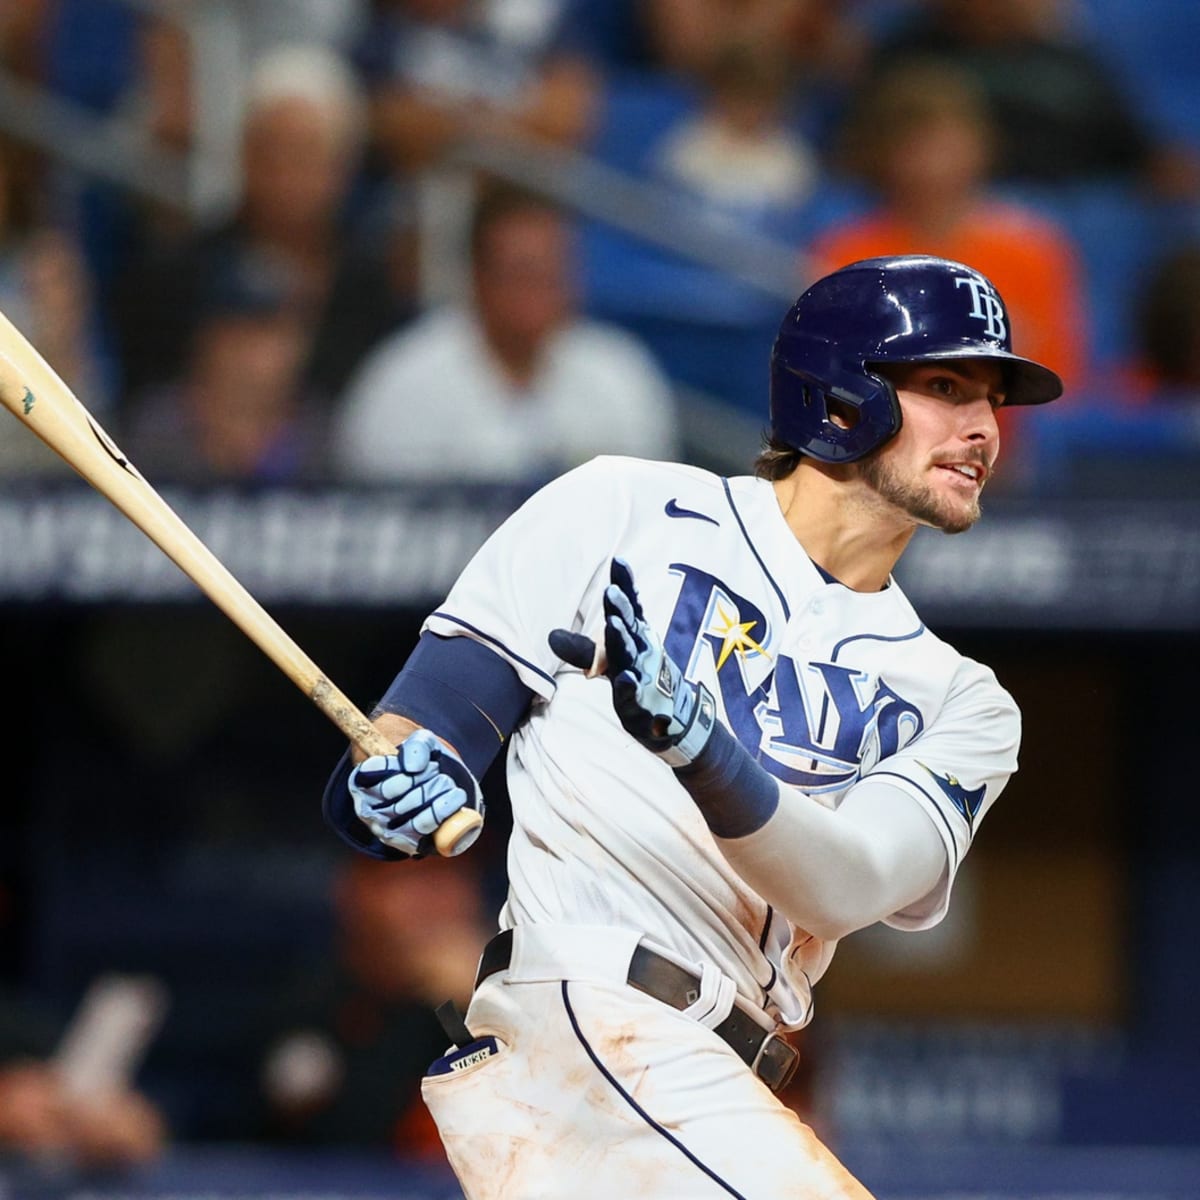 MLB stock report: Orioles up, Rays down as second half heats up